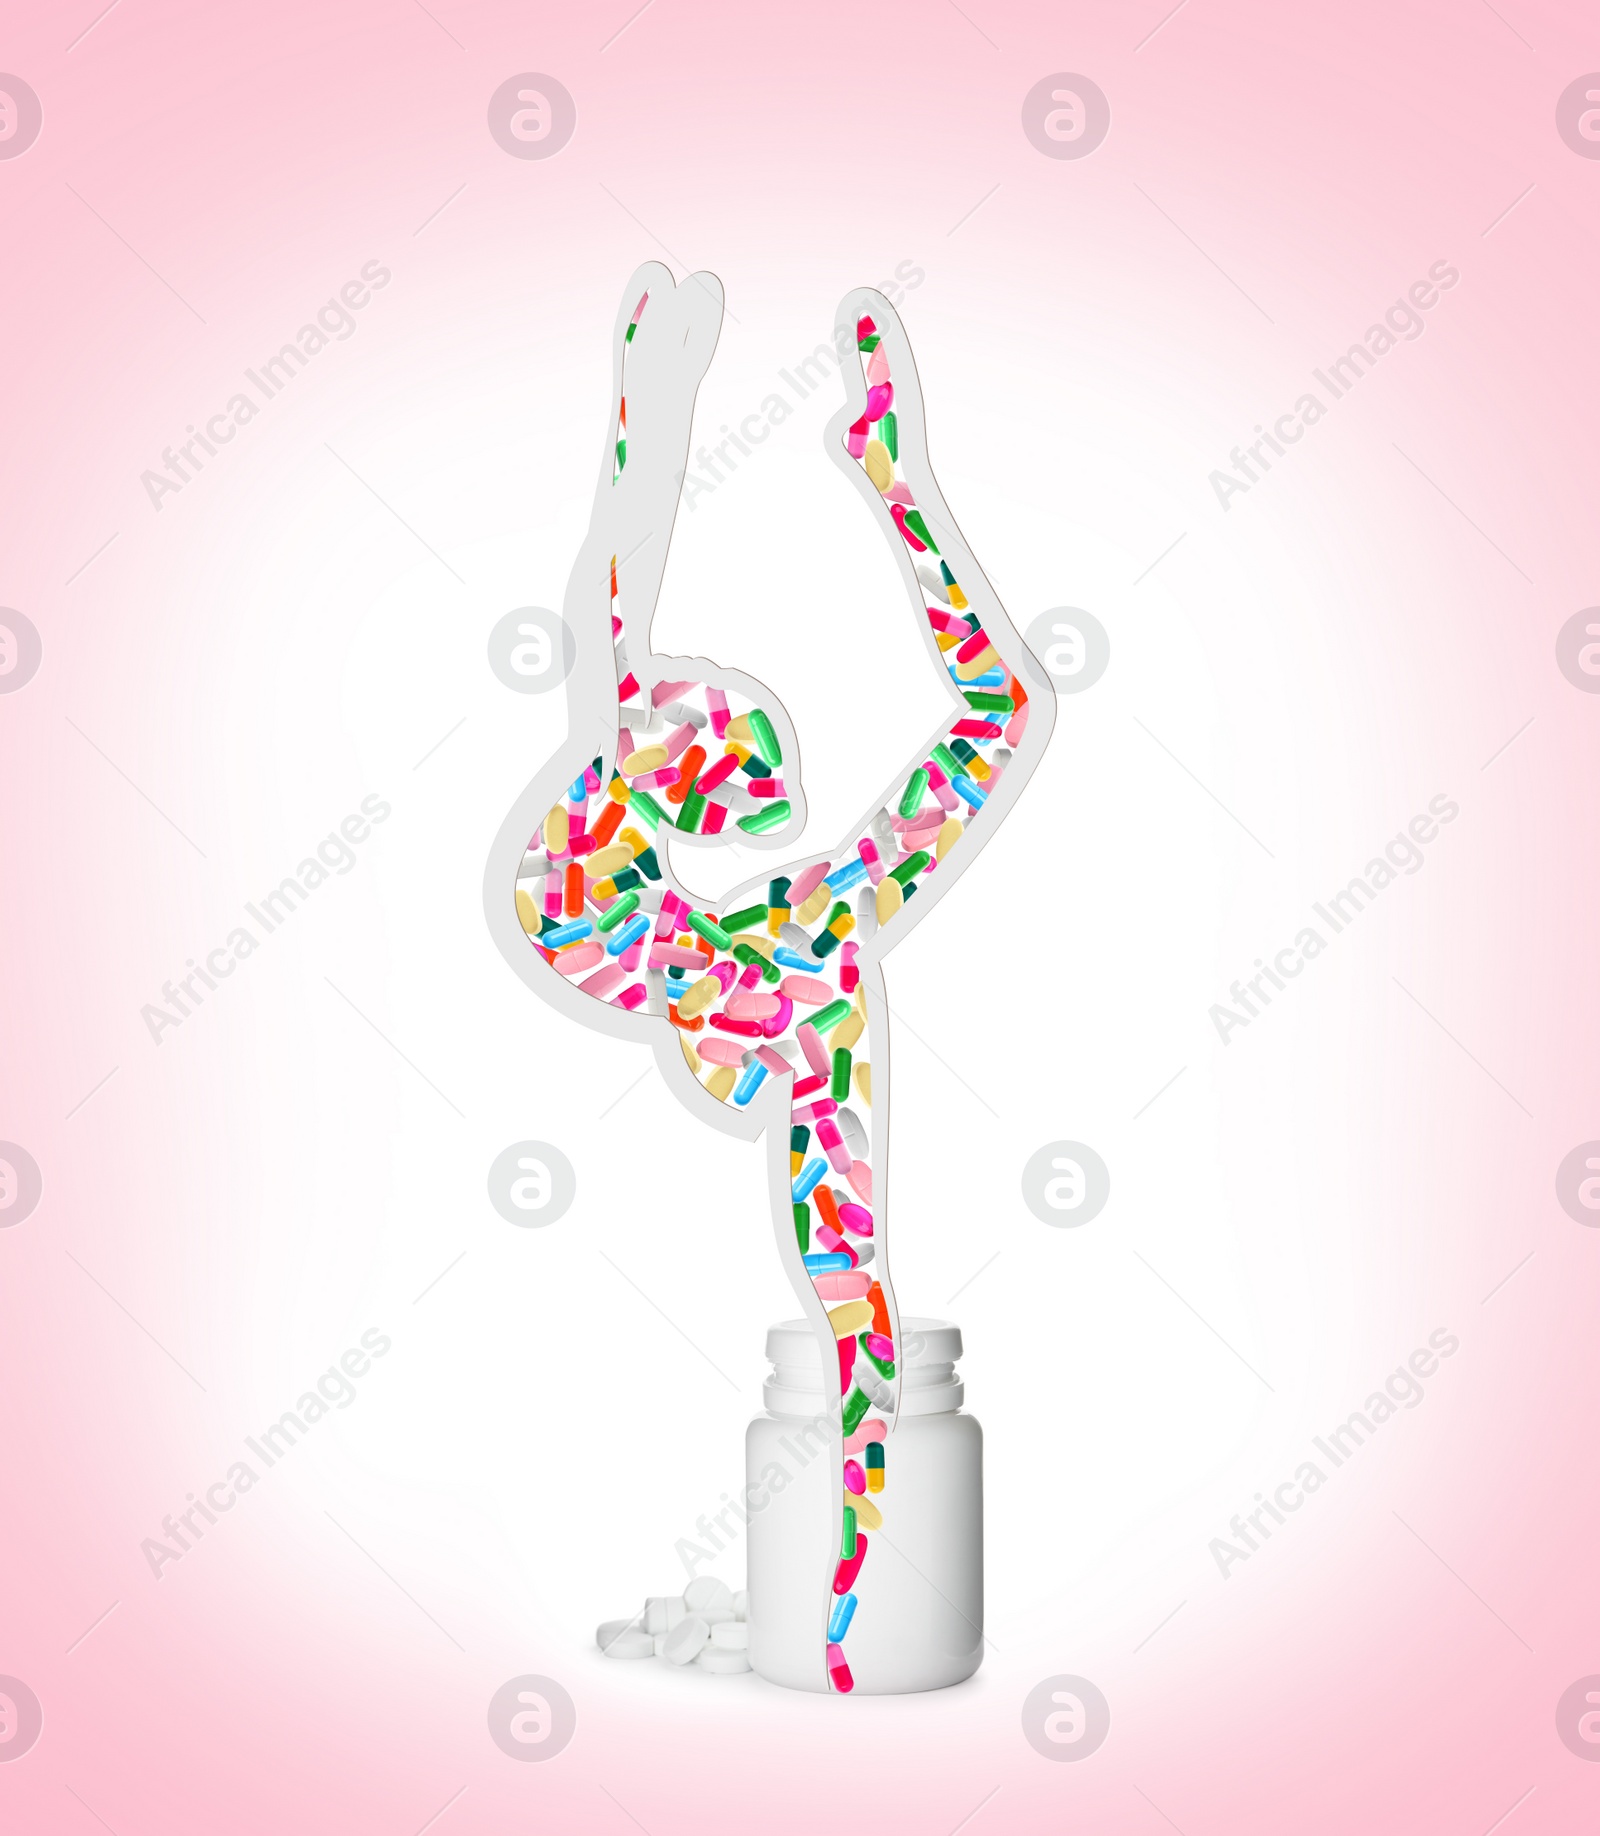 Image of Plastic bottle and silhouette of gymnast filled with pills symbolizing using doping on white background